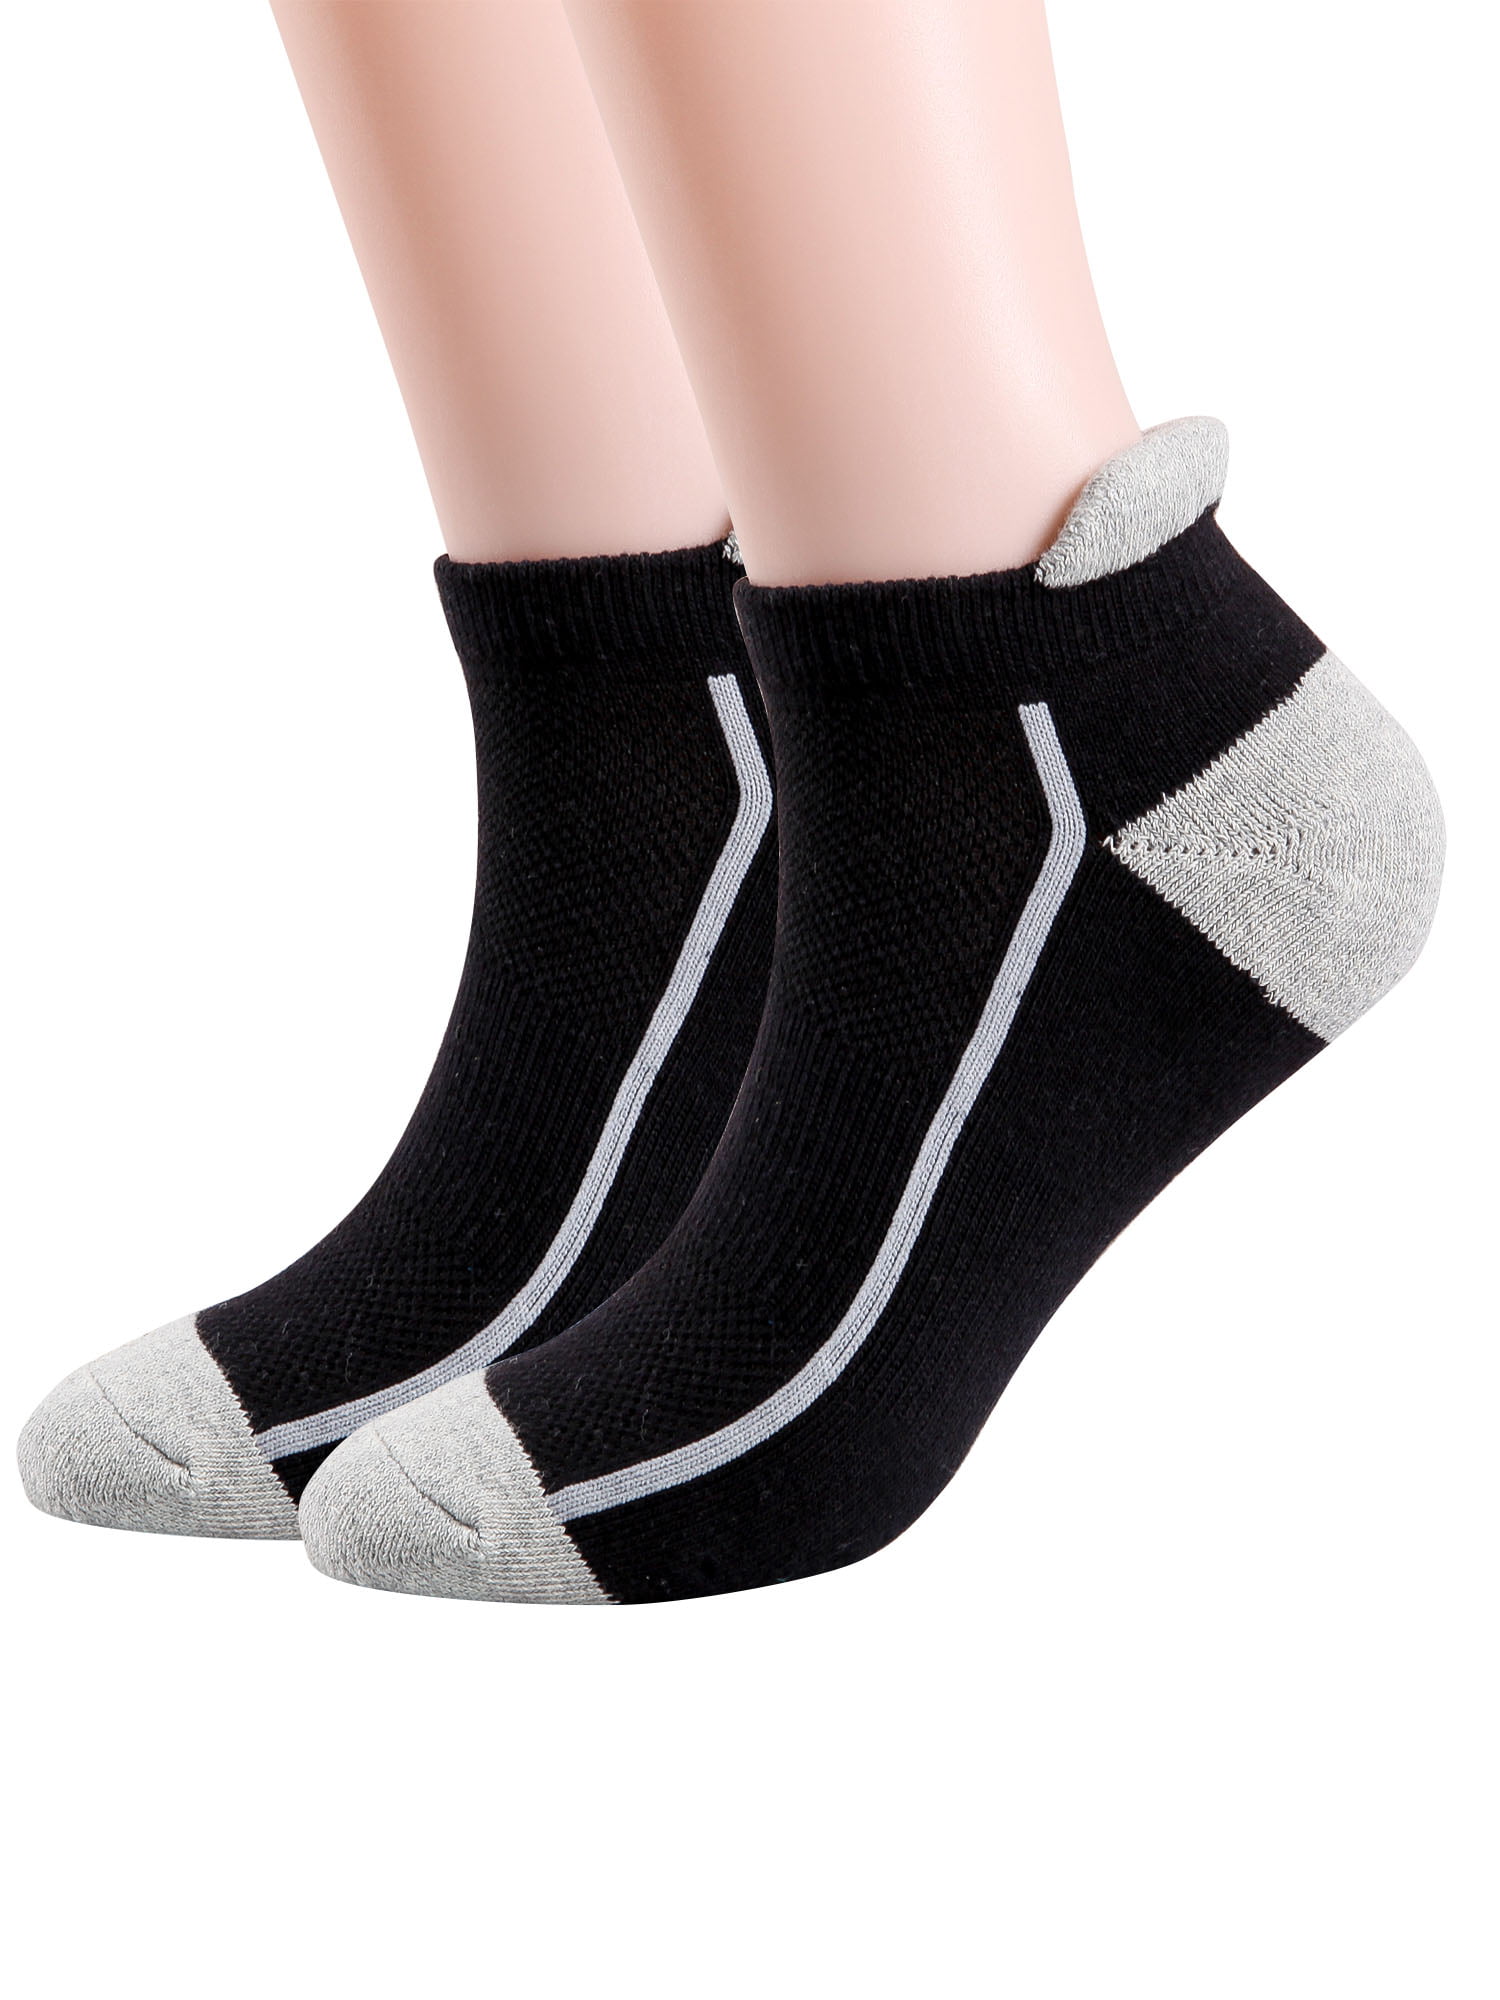 Low Cut Comfort Casual Socks SOFTWIND Men’s Cushion Ankle Socks With Arch Support